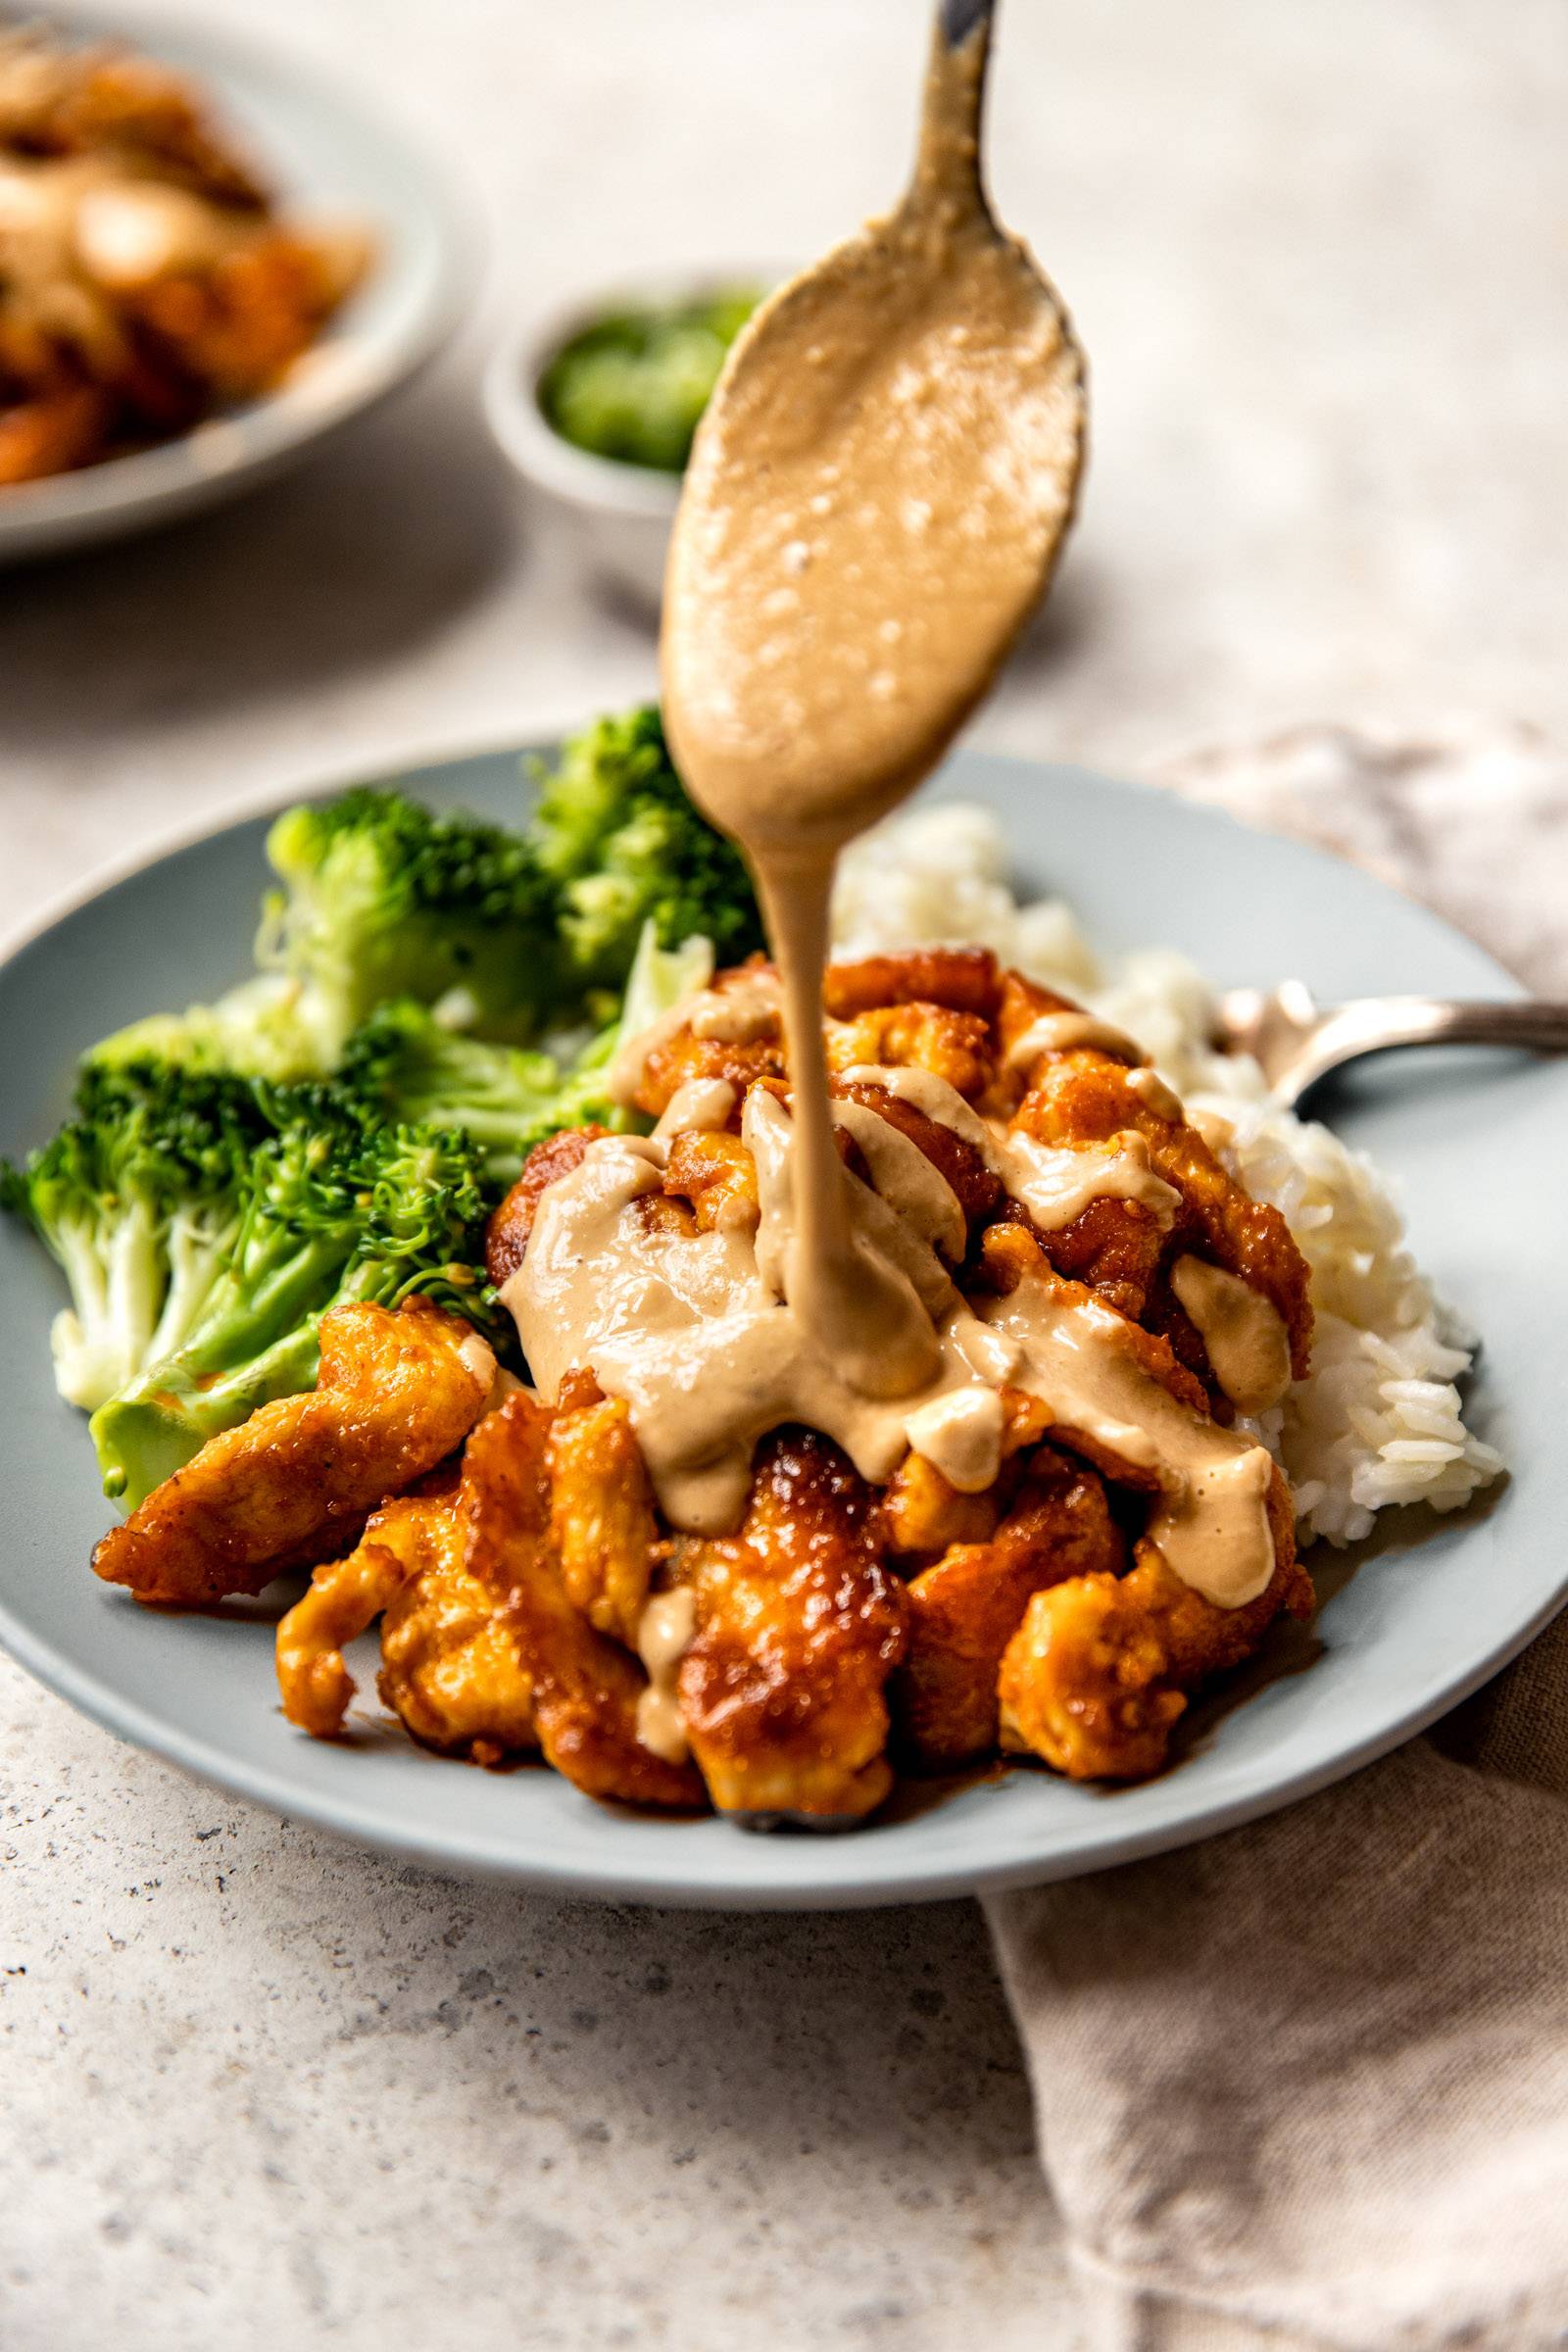 Cashew sauce drizzled over red curry chicken stir-fry